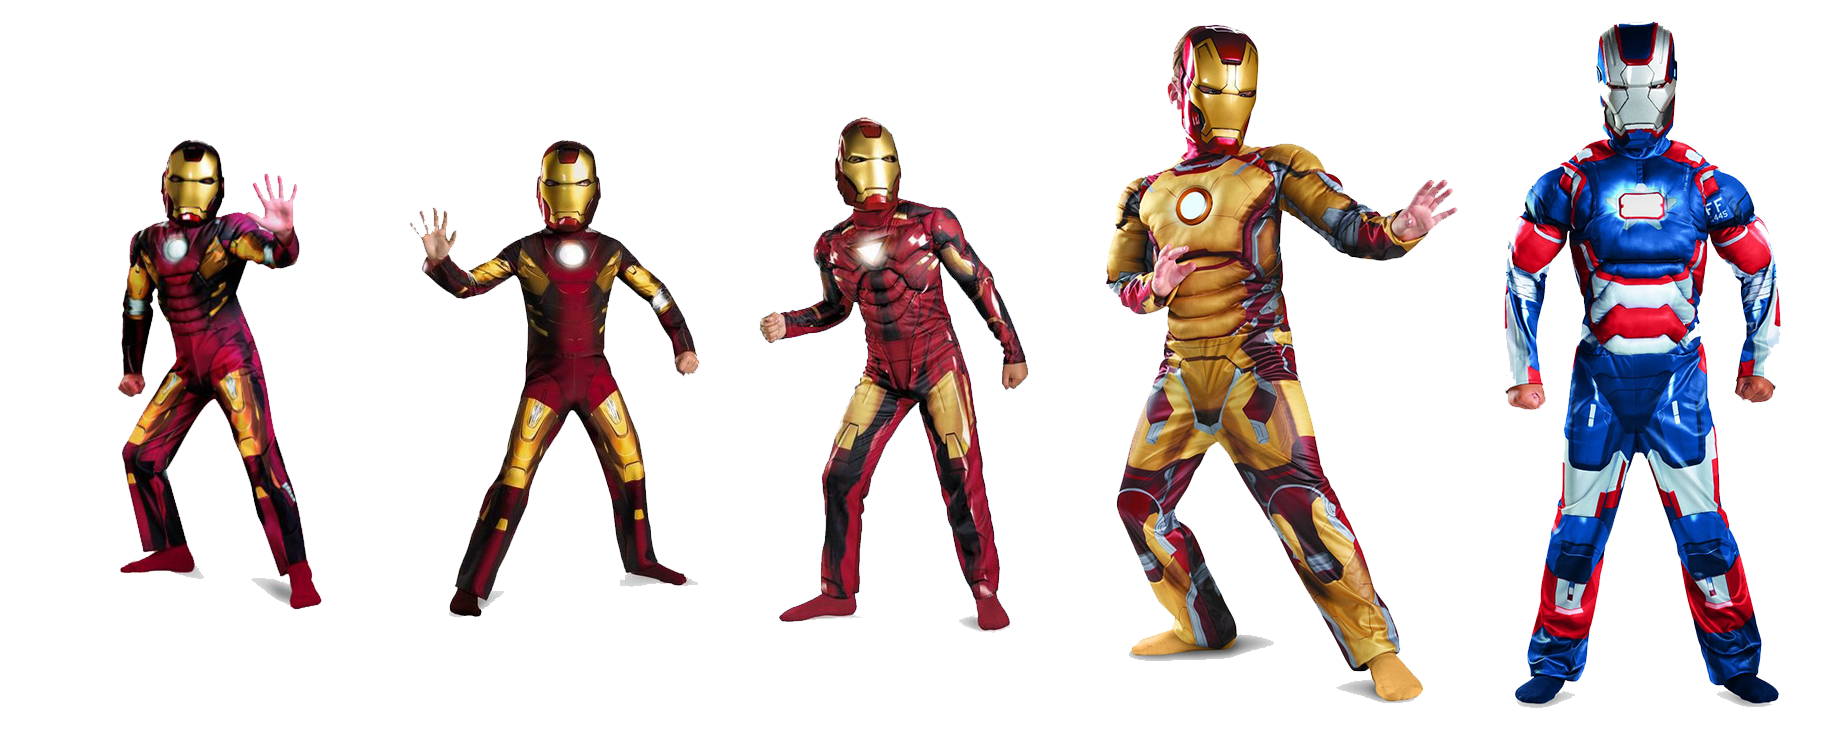 Iron Man Suit - The Best Iron Man Costumes and Replicas!